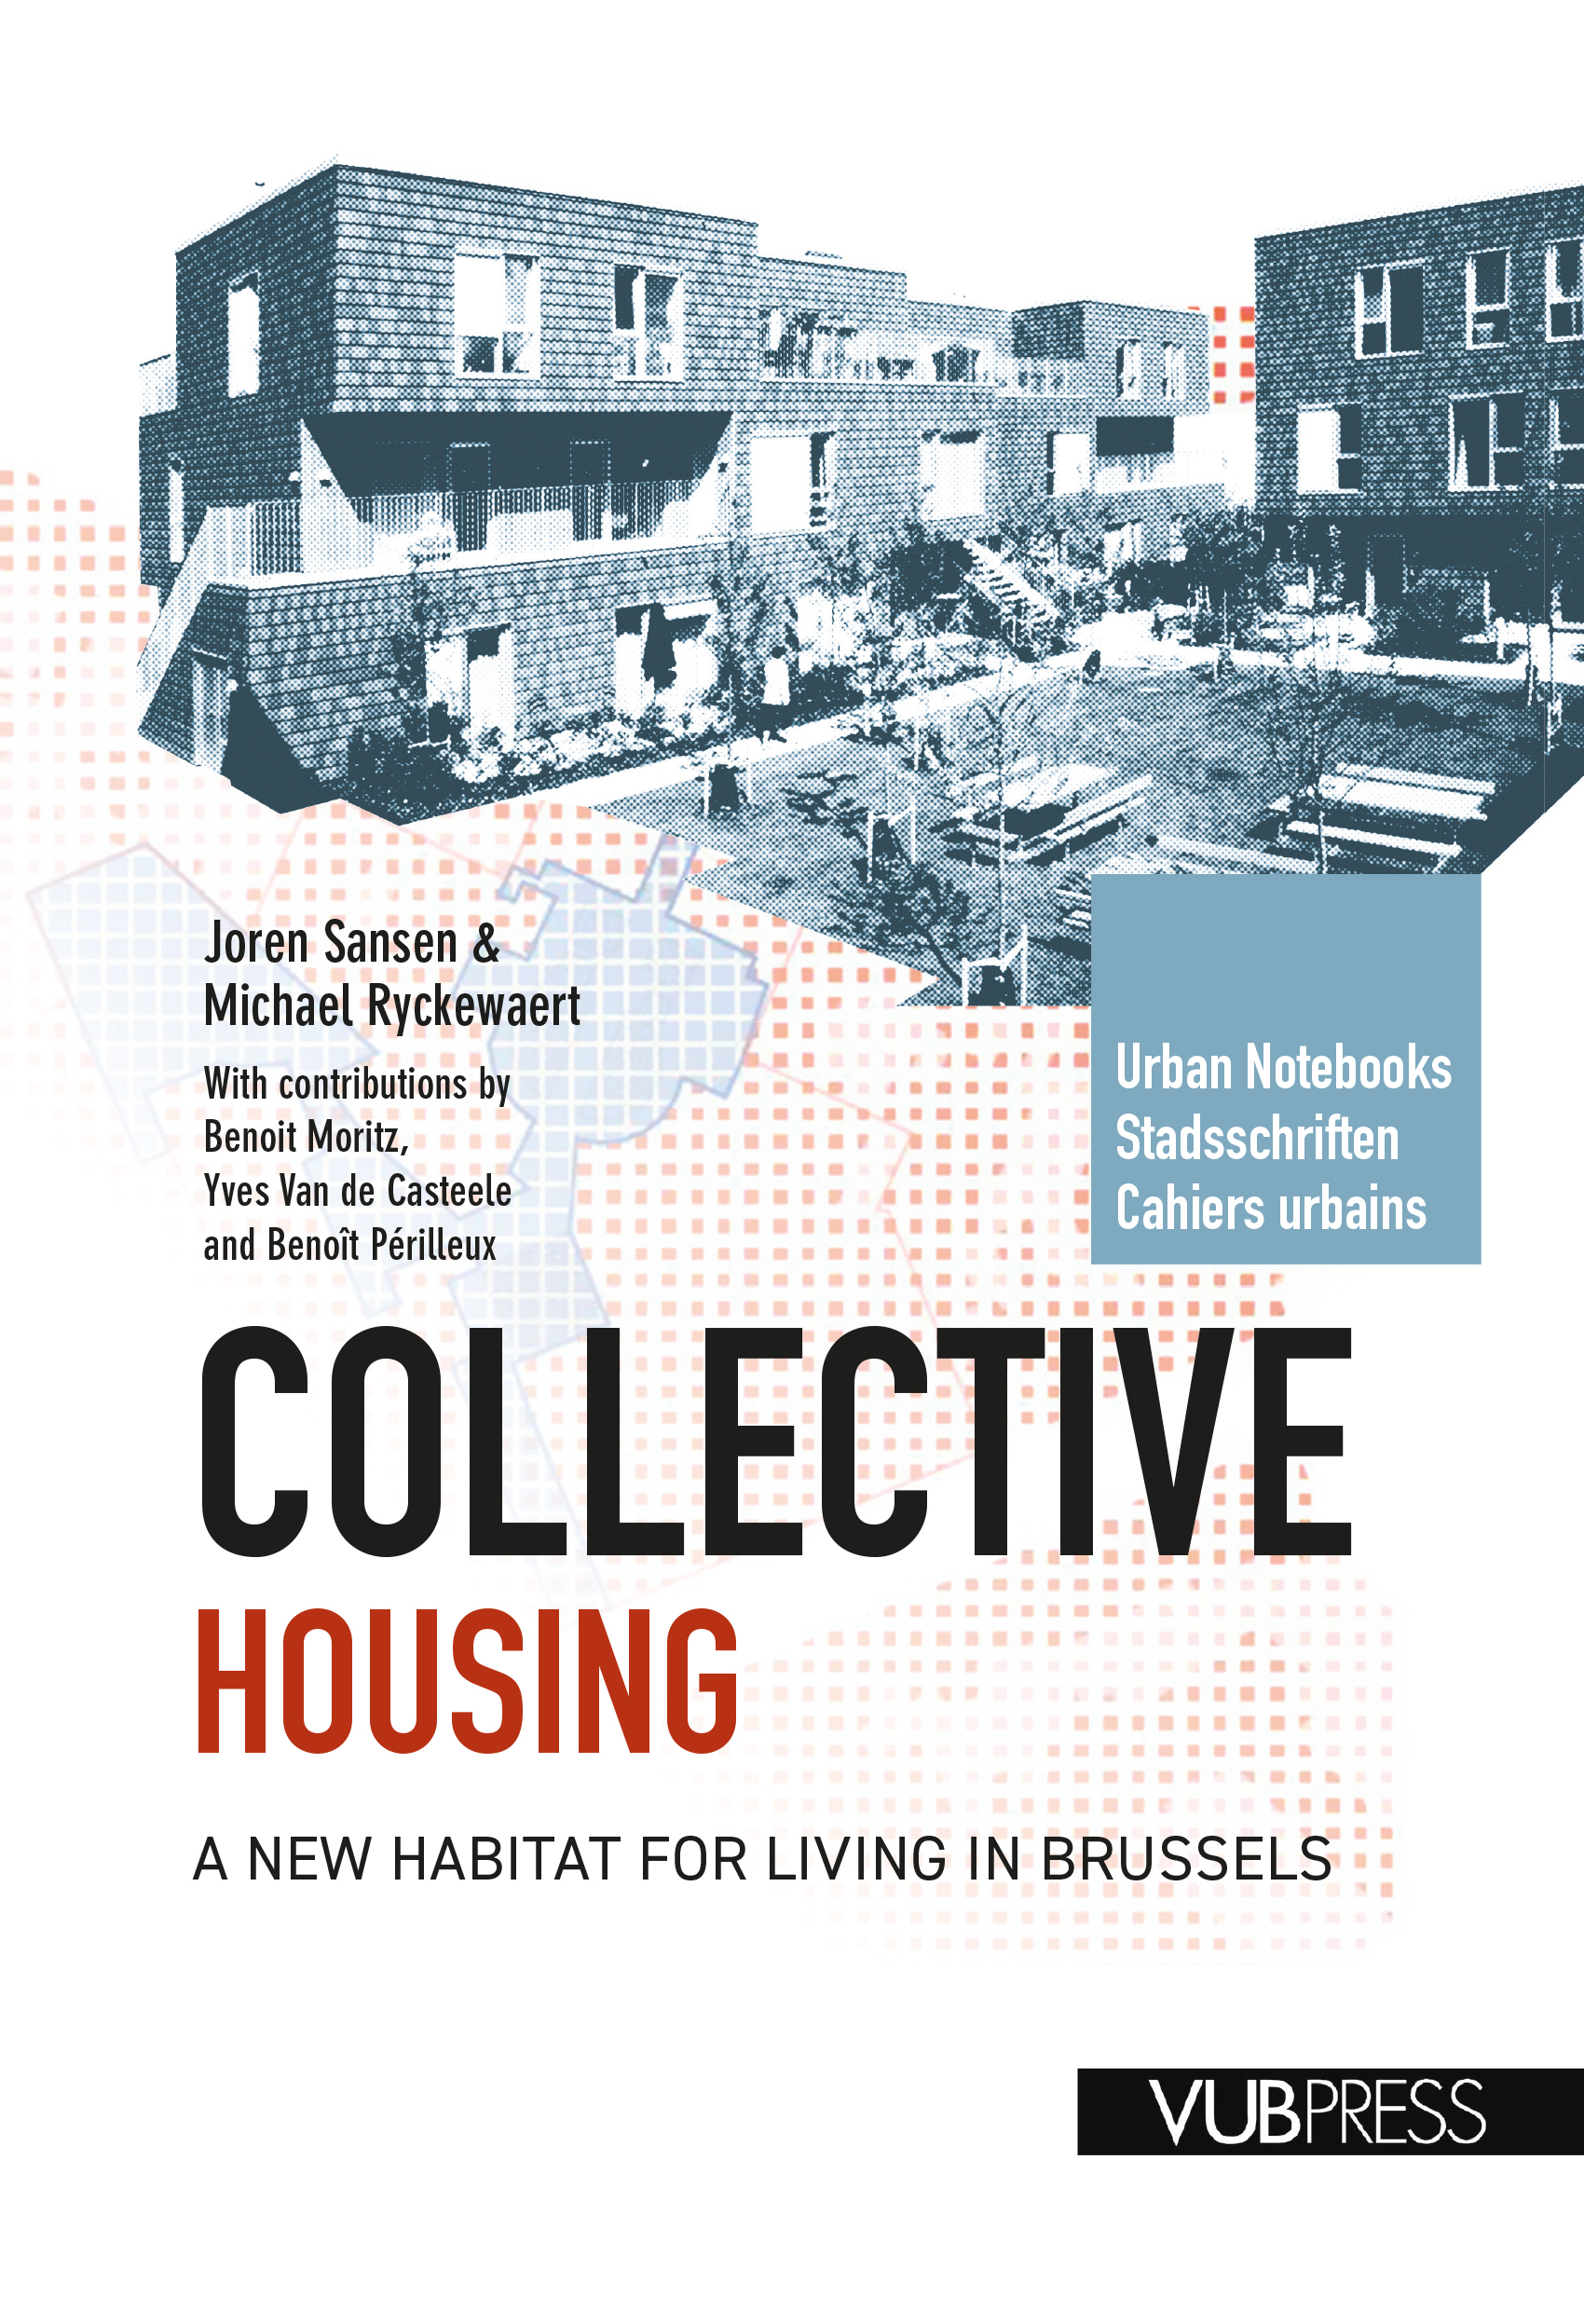 COLLECTIVE HOUSING